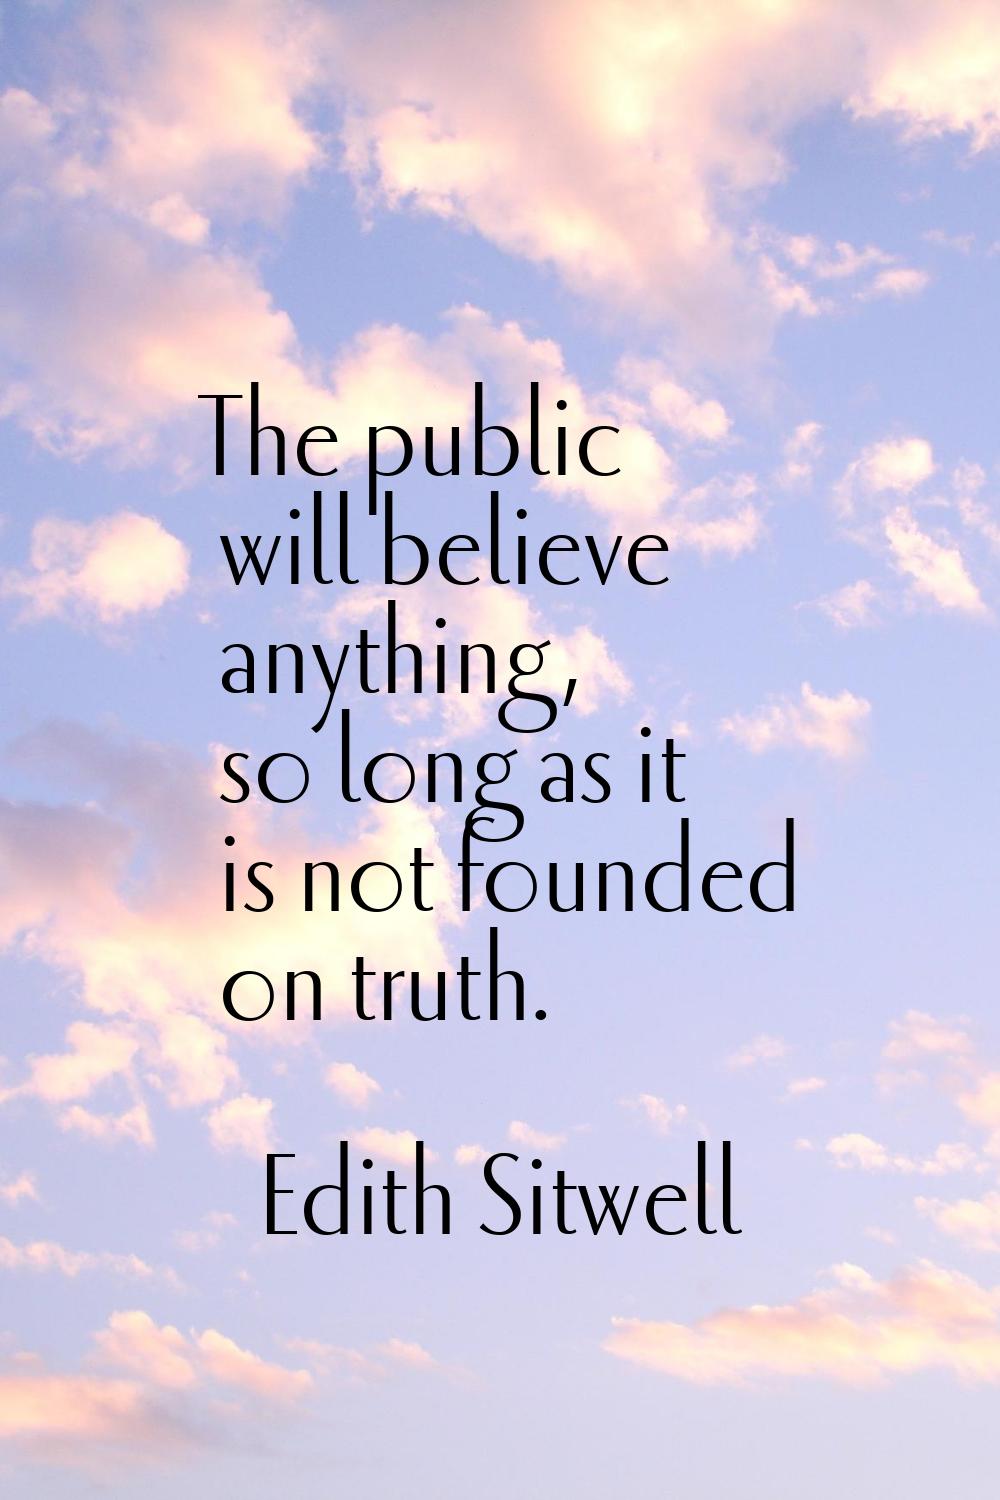 The public will believe anything, so long as it is not founded on truth.